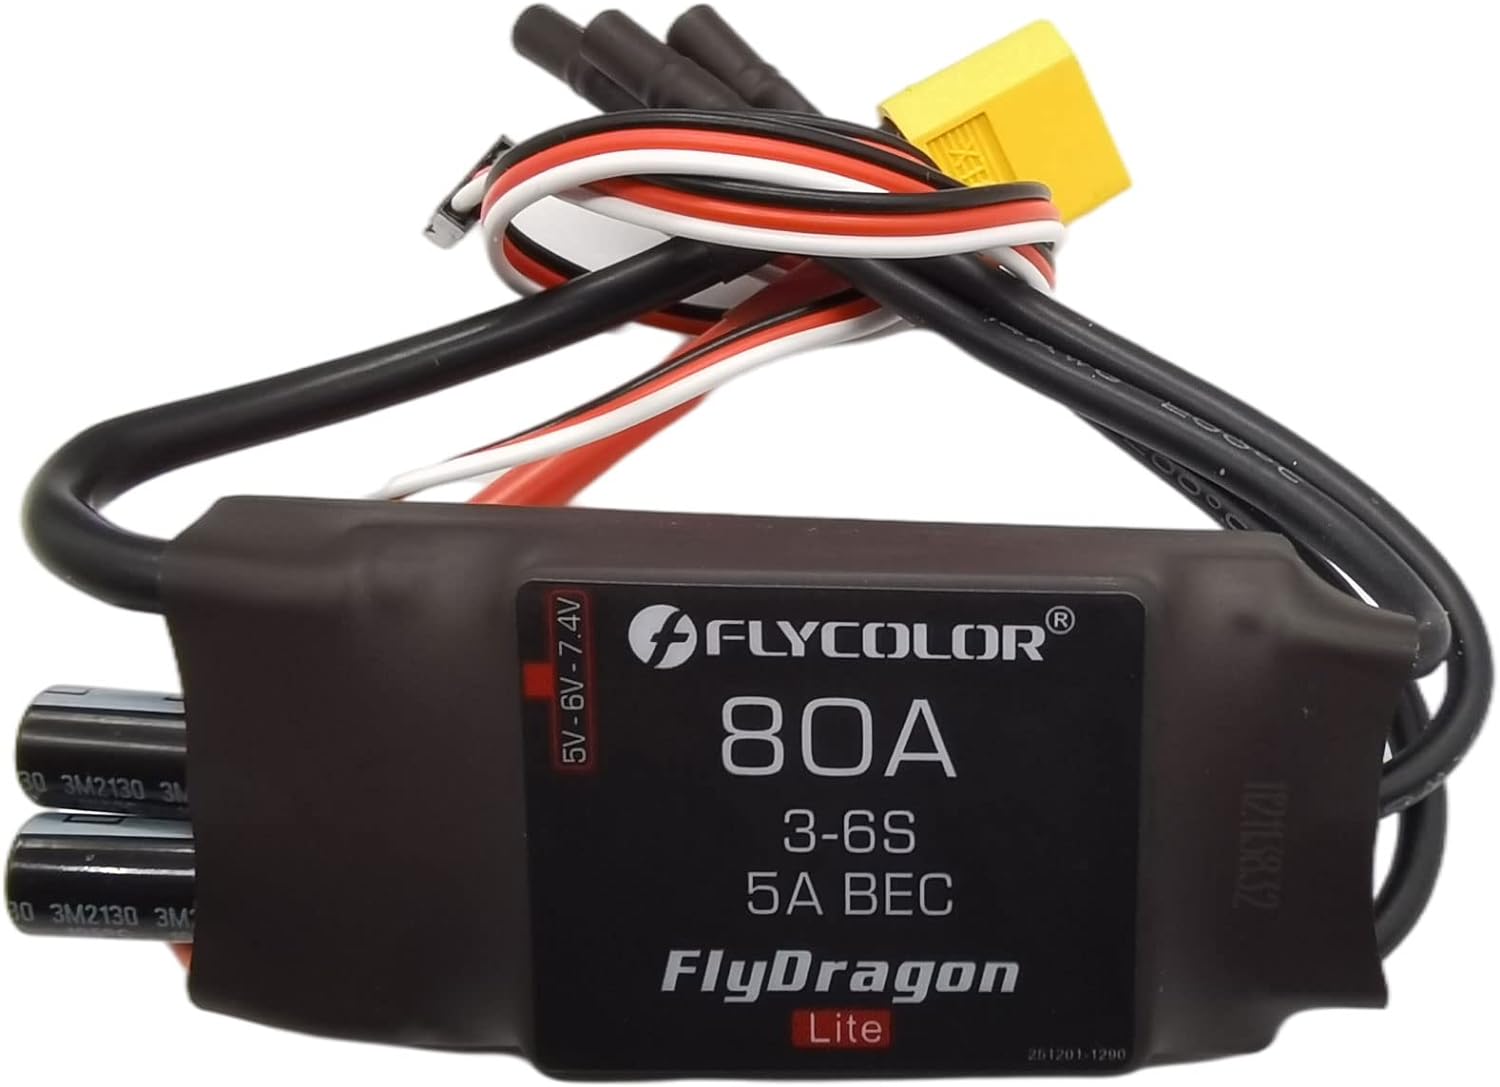 Flycolor 80A 3-6S ESC with 5A BEC (5v/6v/7.4v) – Electric Speed Controller with XT60 Connector & 3.5mm Bullet Plugs for RC Drones and Airplane Brushless Motors